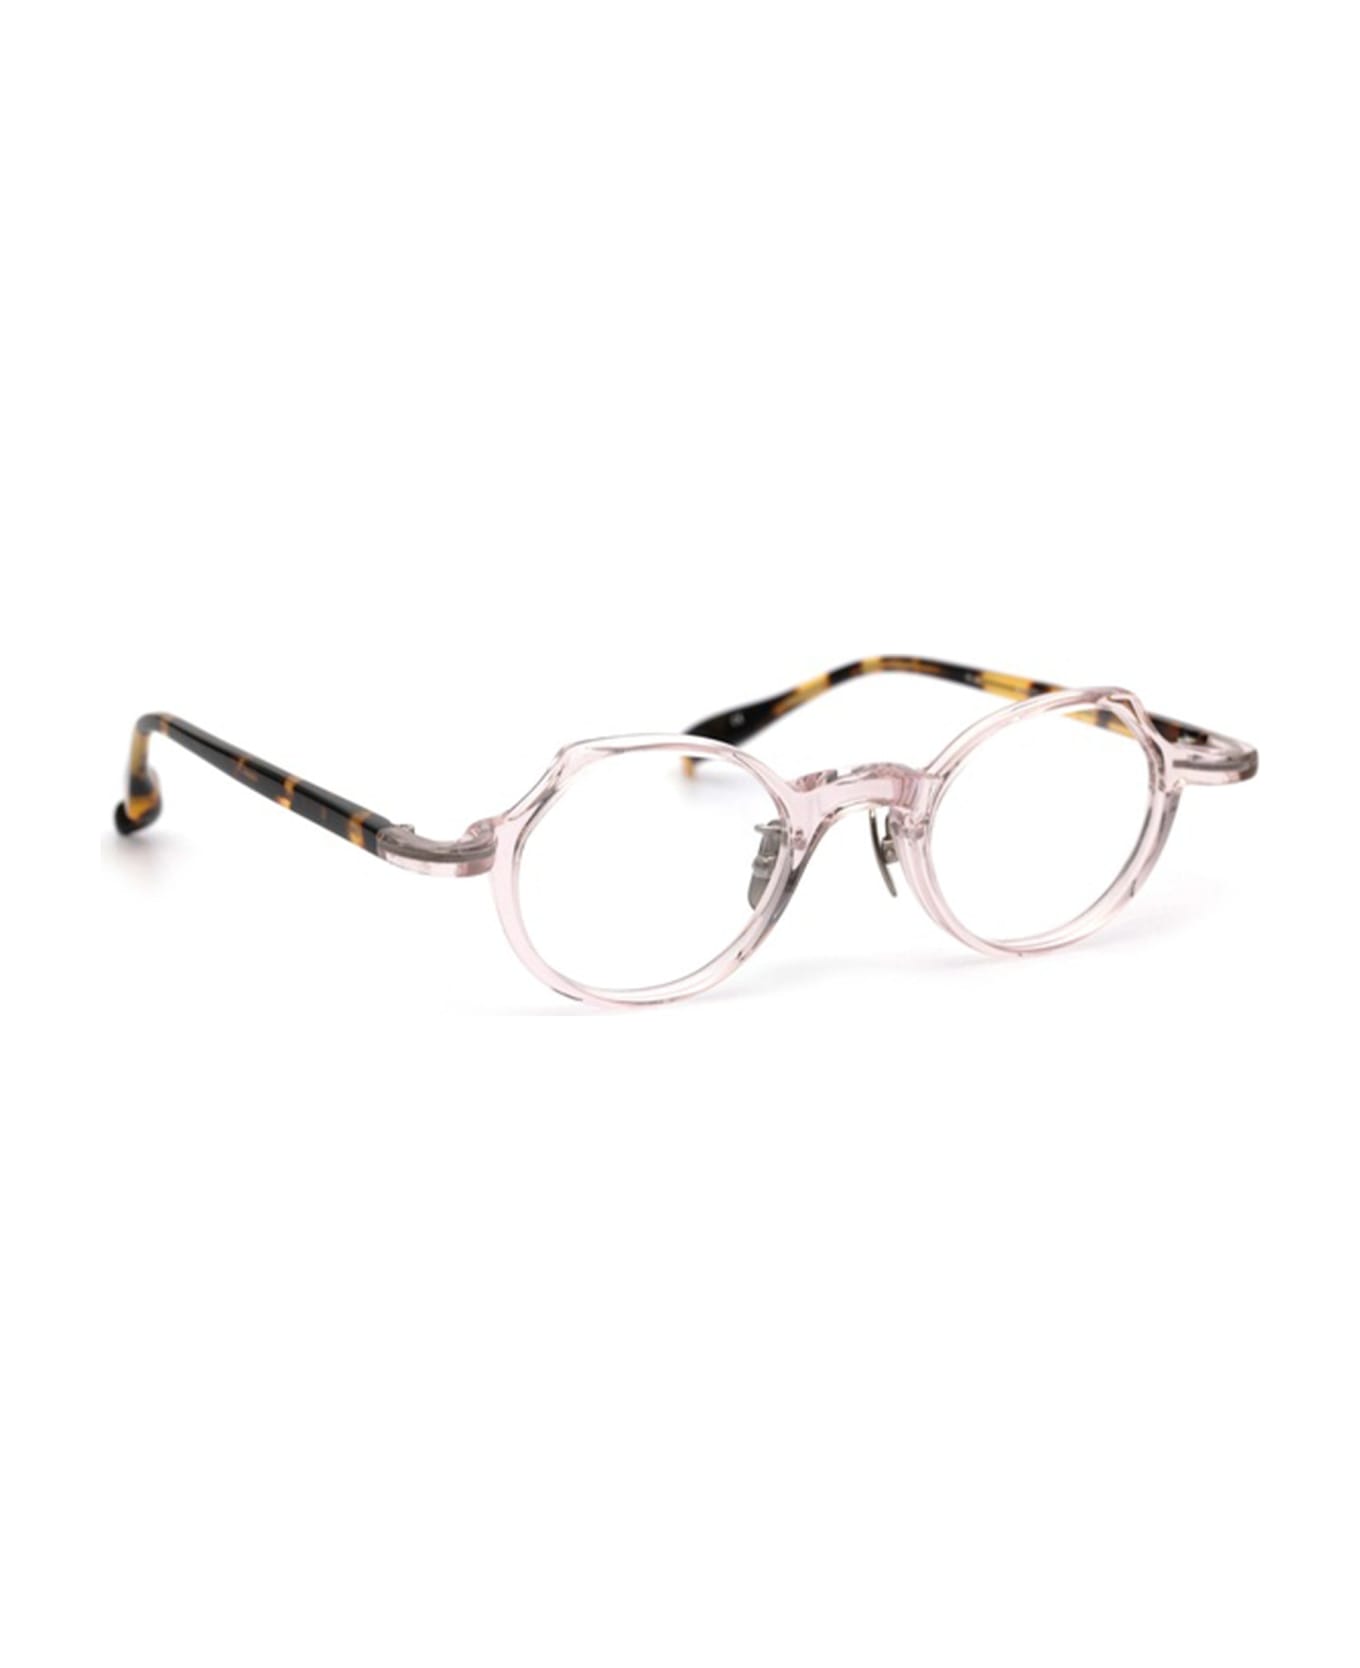 FACTORY900 Mimi - Clear Pink Glasses - pink/tortoise アイウェア